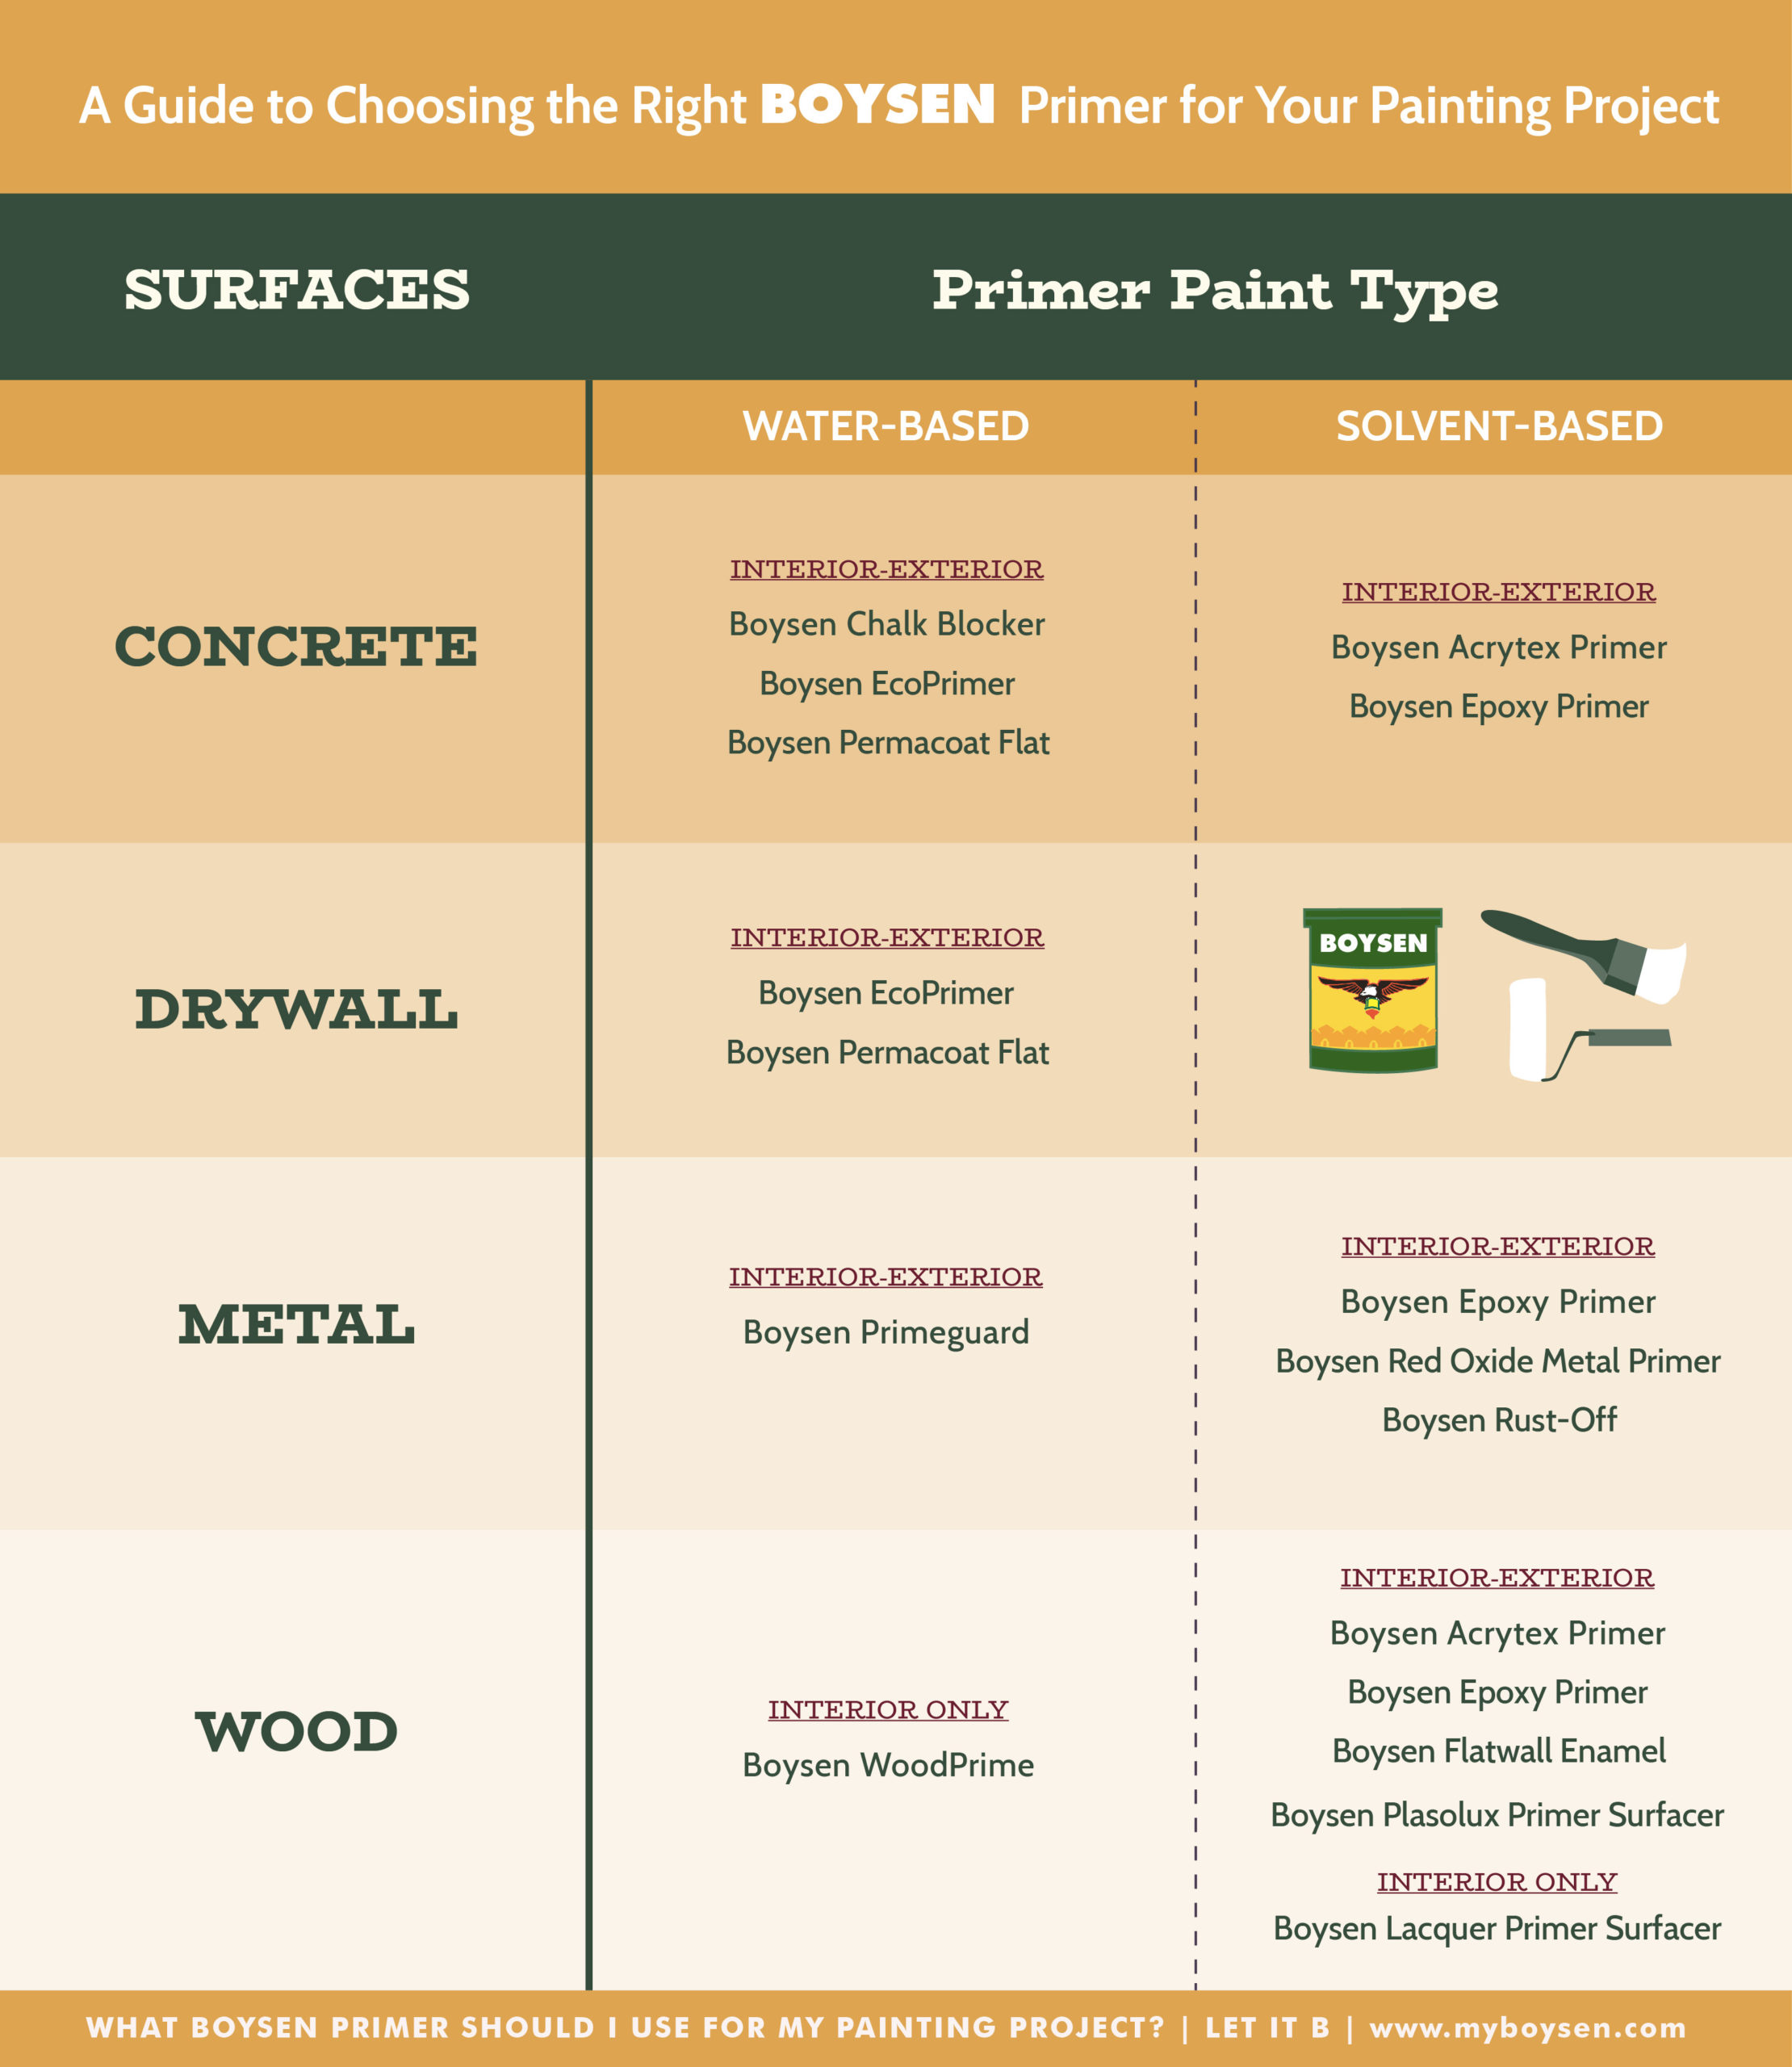 What Boysen Primer Should I Use for My Painting Project? | MyBoysen